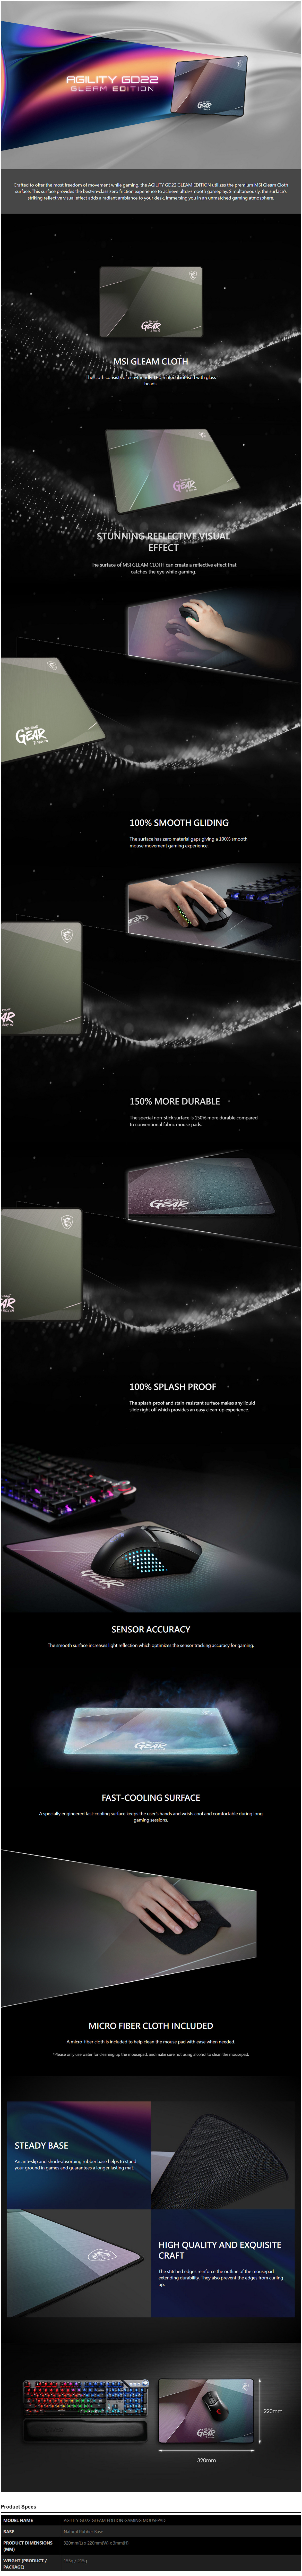 A large marketing image providing additional information about the product MSI Agility GD22 Gleam Edition Mousemat - Additional alt info not provided